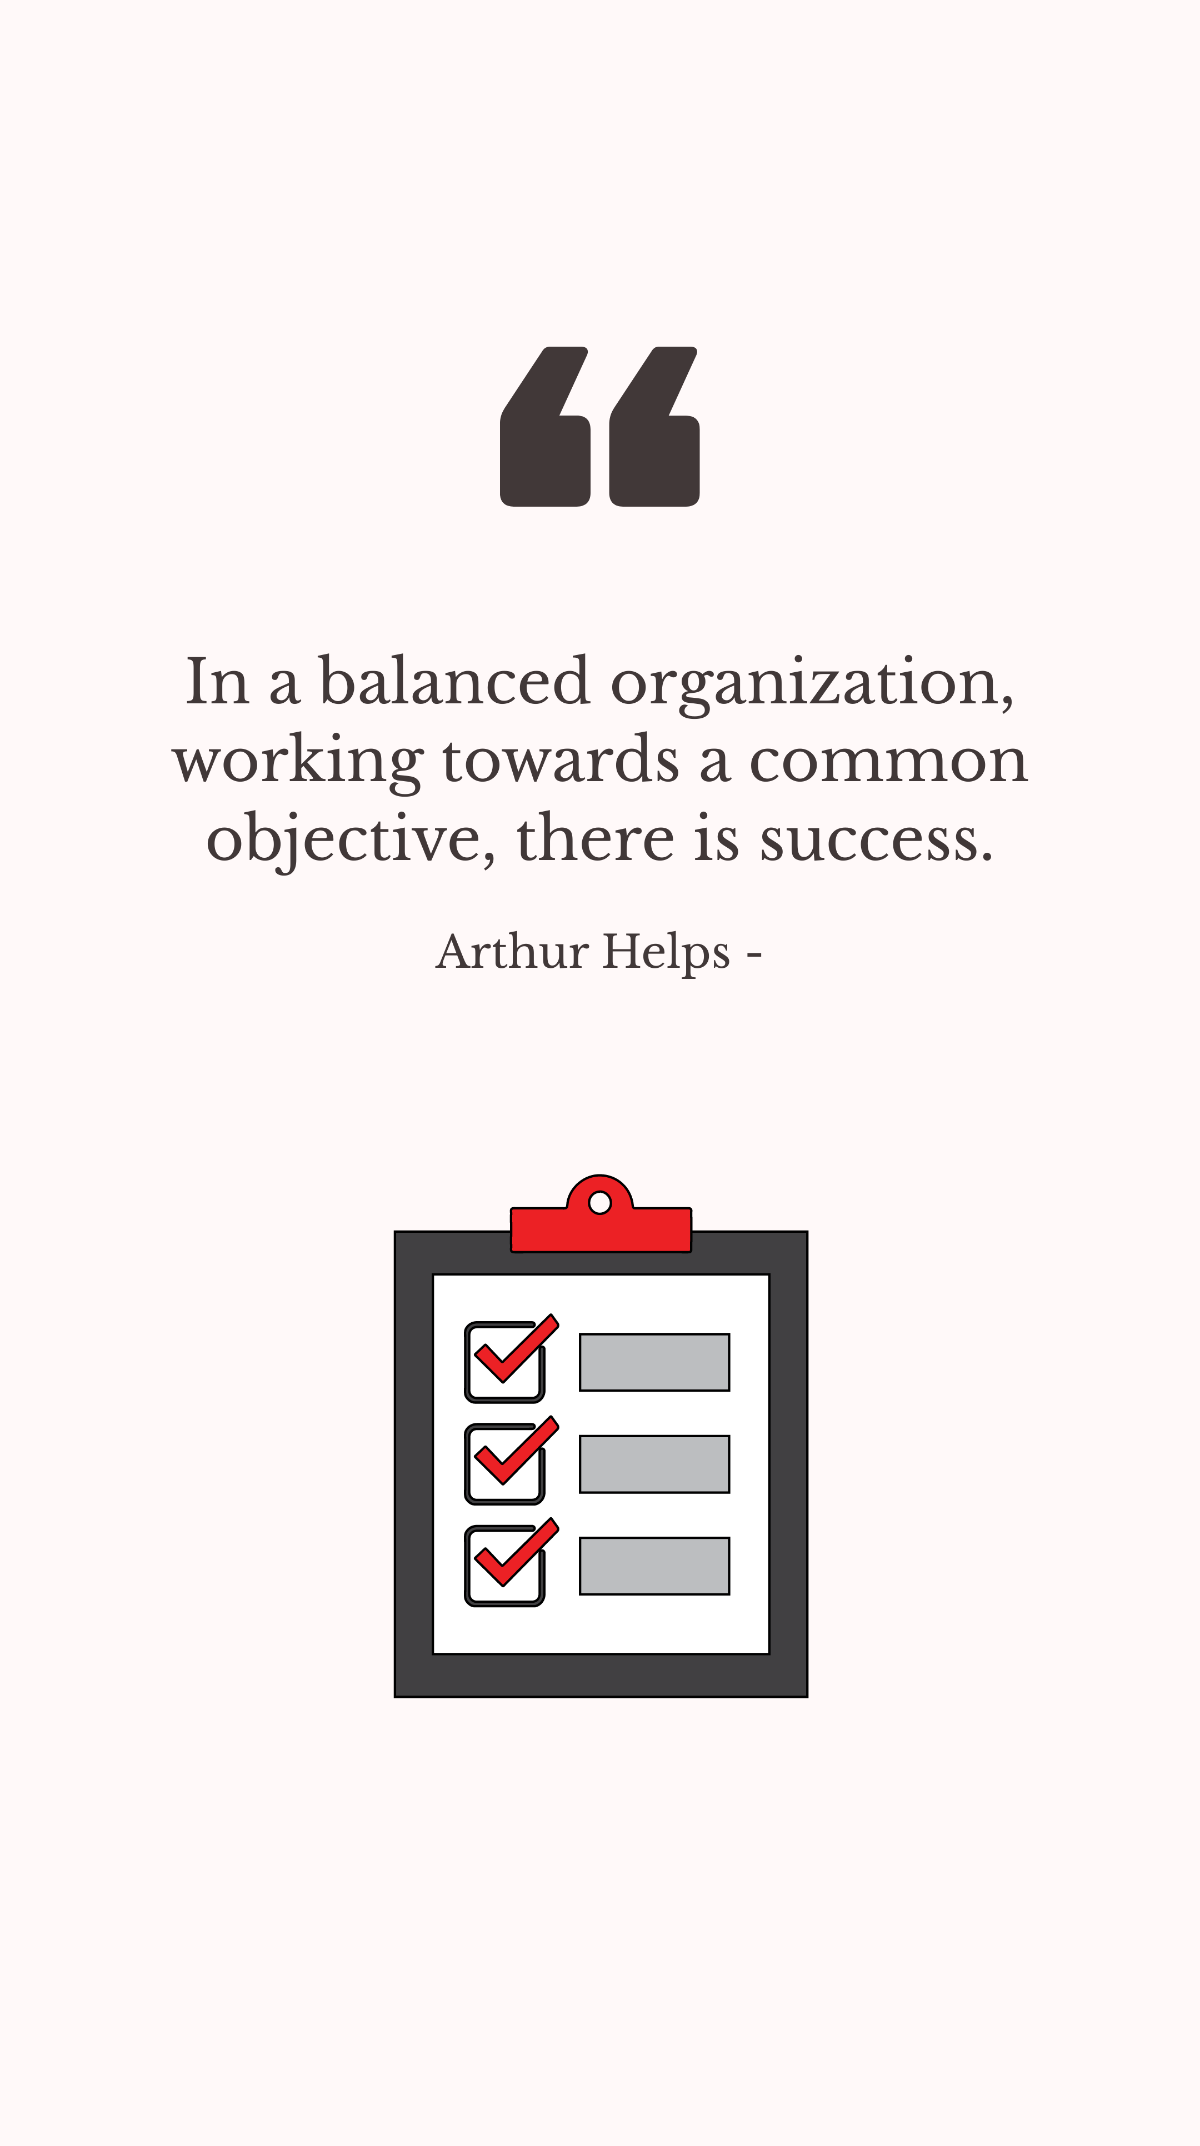 Free Arthur Helps - In a balanced organization, working towards a common objective, there is success. Template